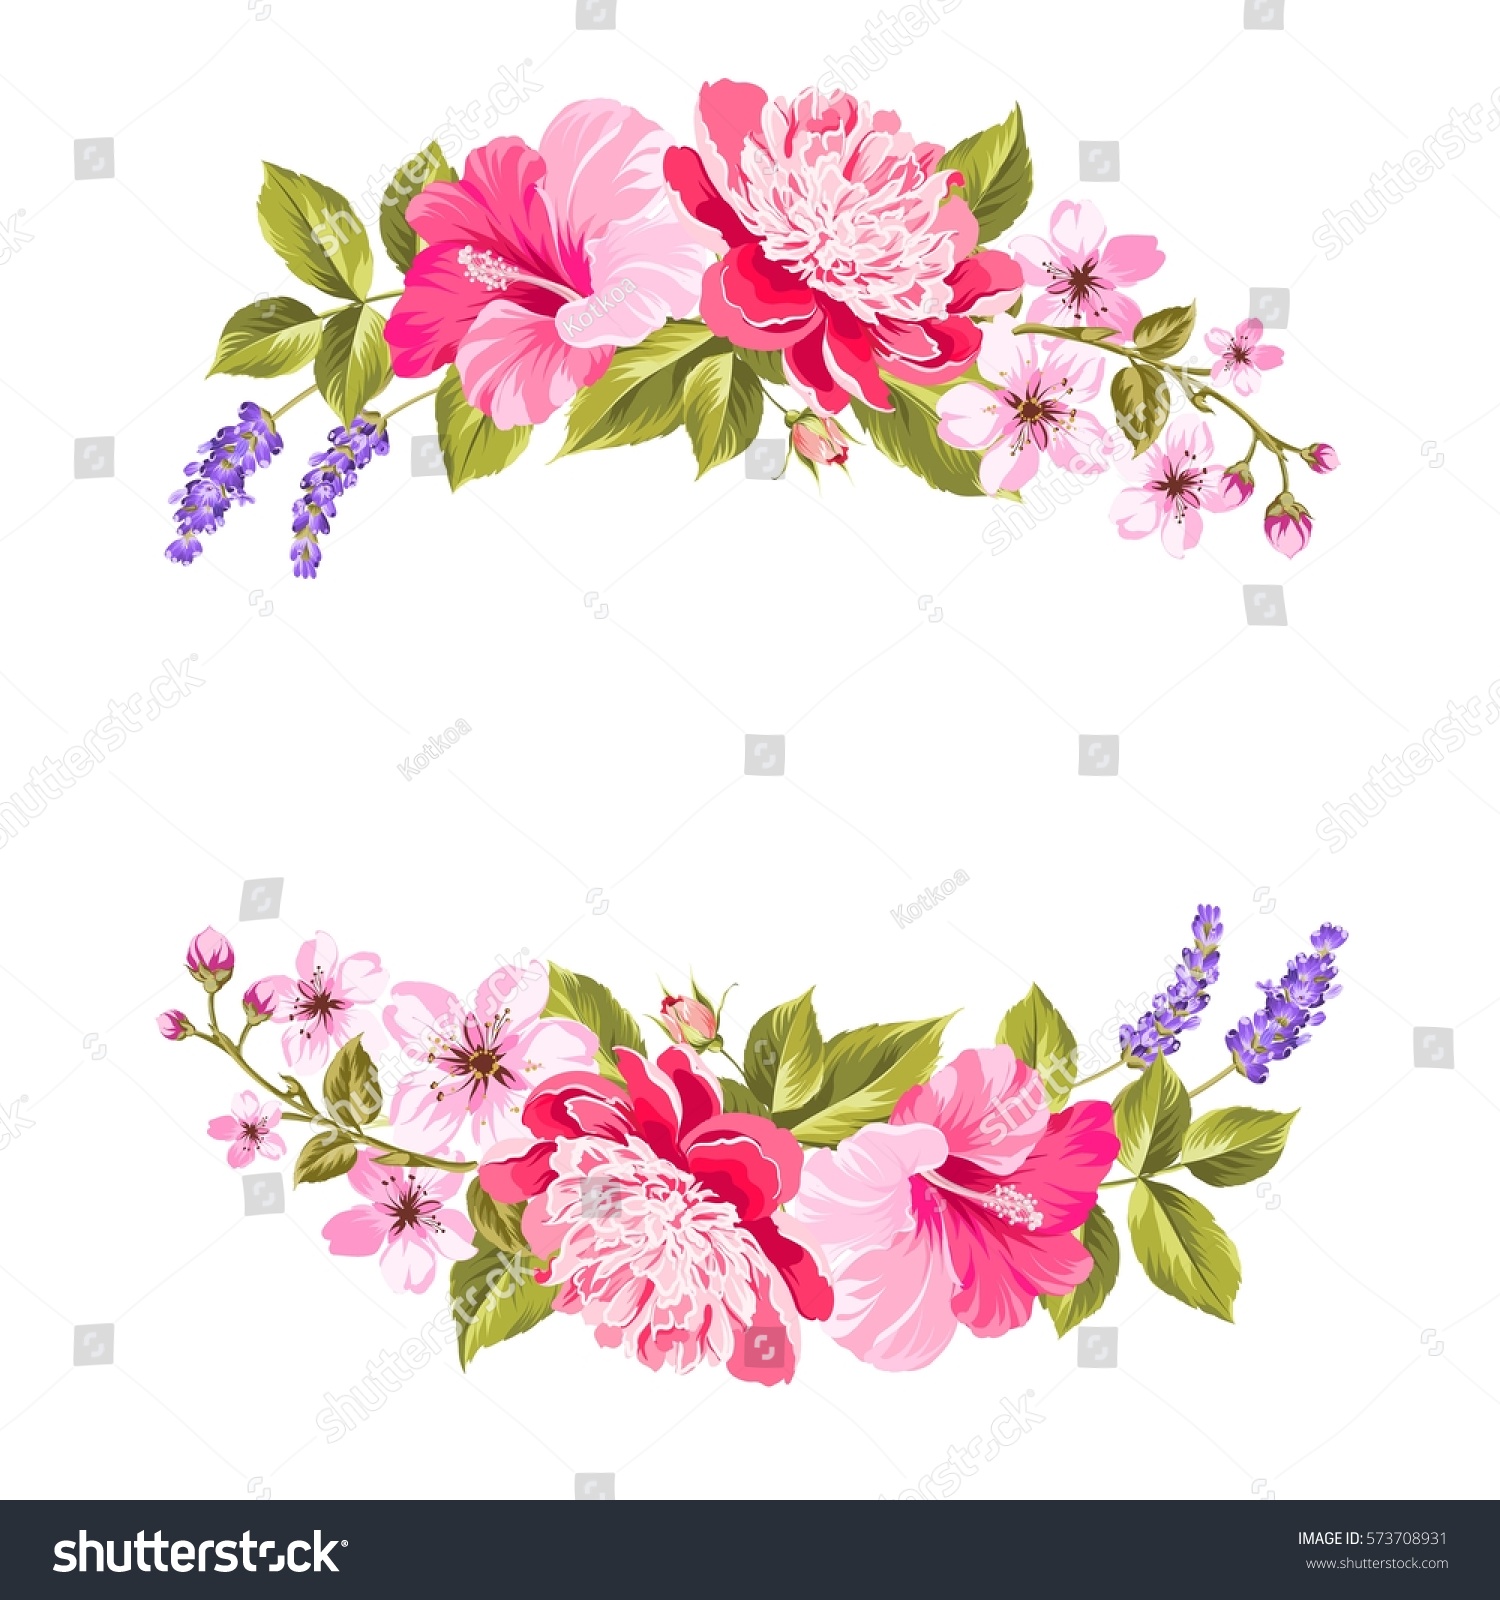 Download Tropical Flower Garland Free Copy Space Stock Vector (Royalty Free) 573708931 - Shutterstock